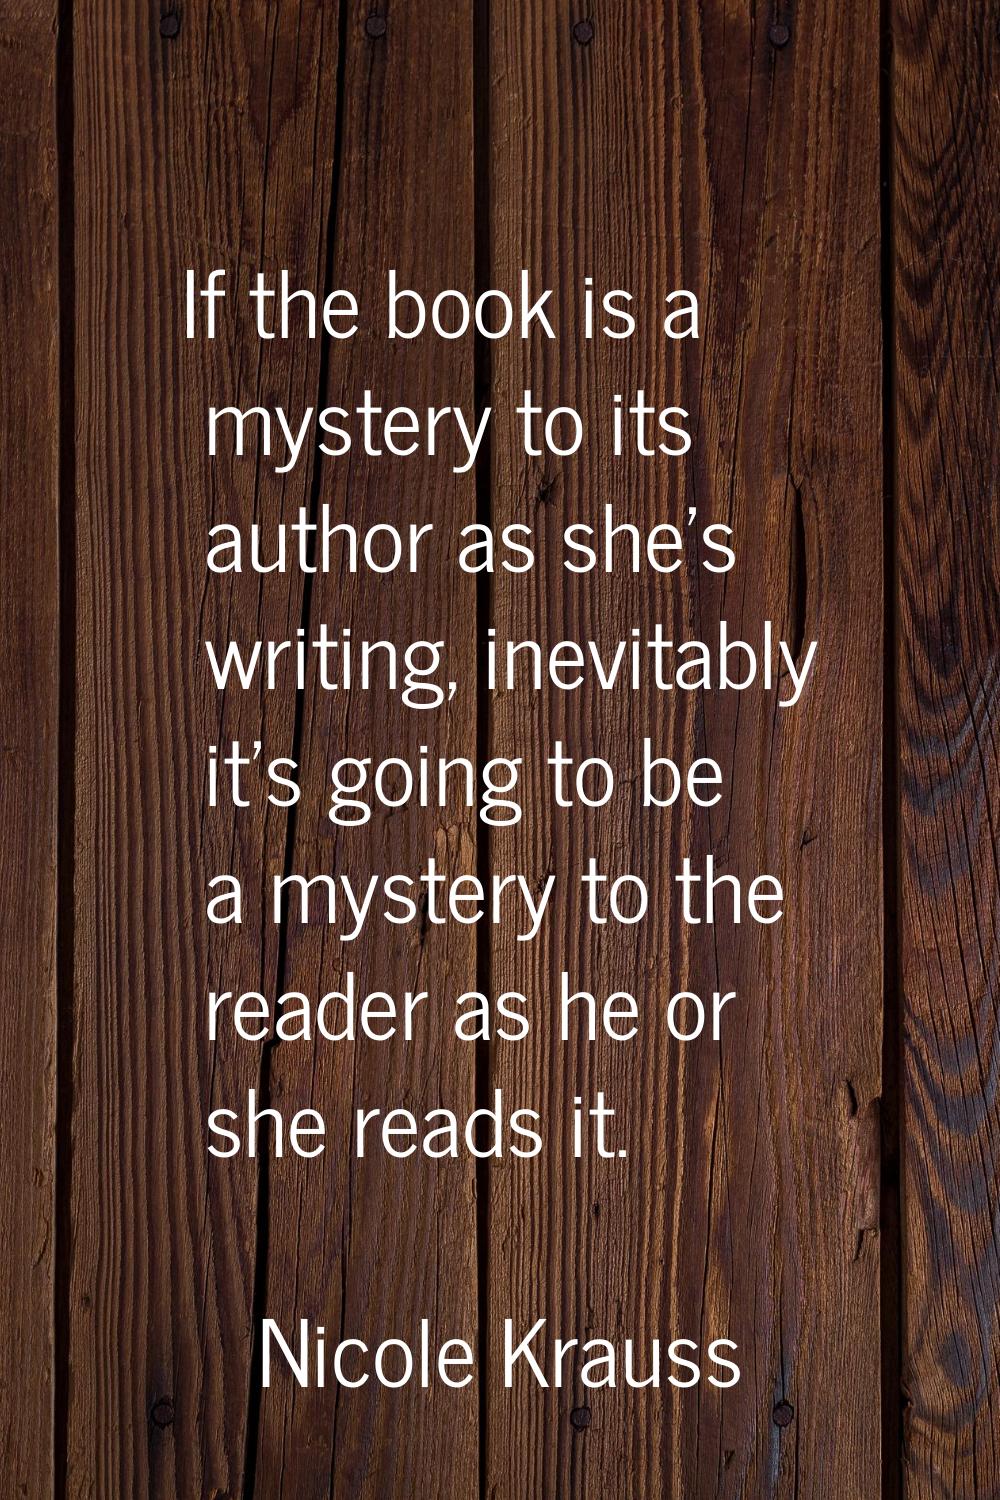 If the book is a mystery to its author as she's writing, inevitably it's going to be a mystery to t